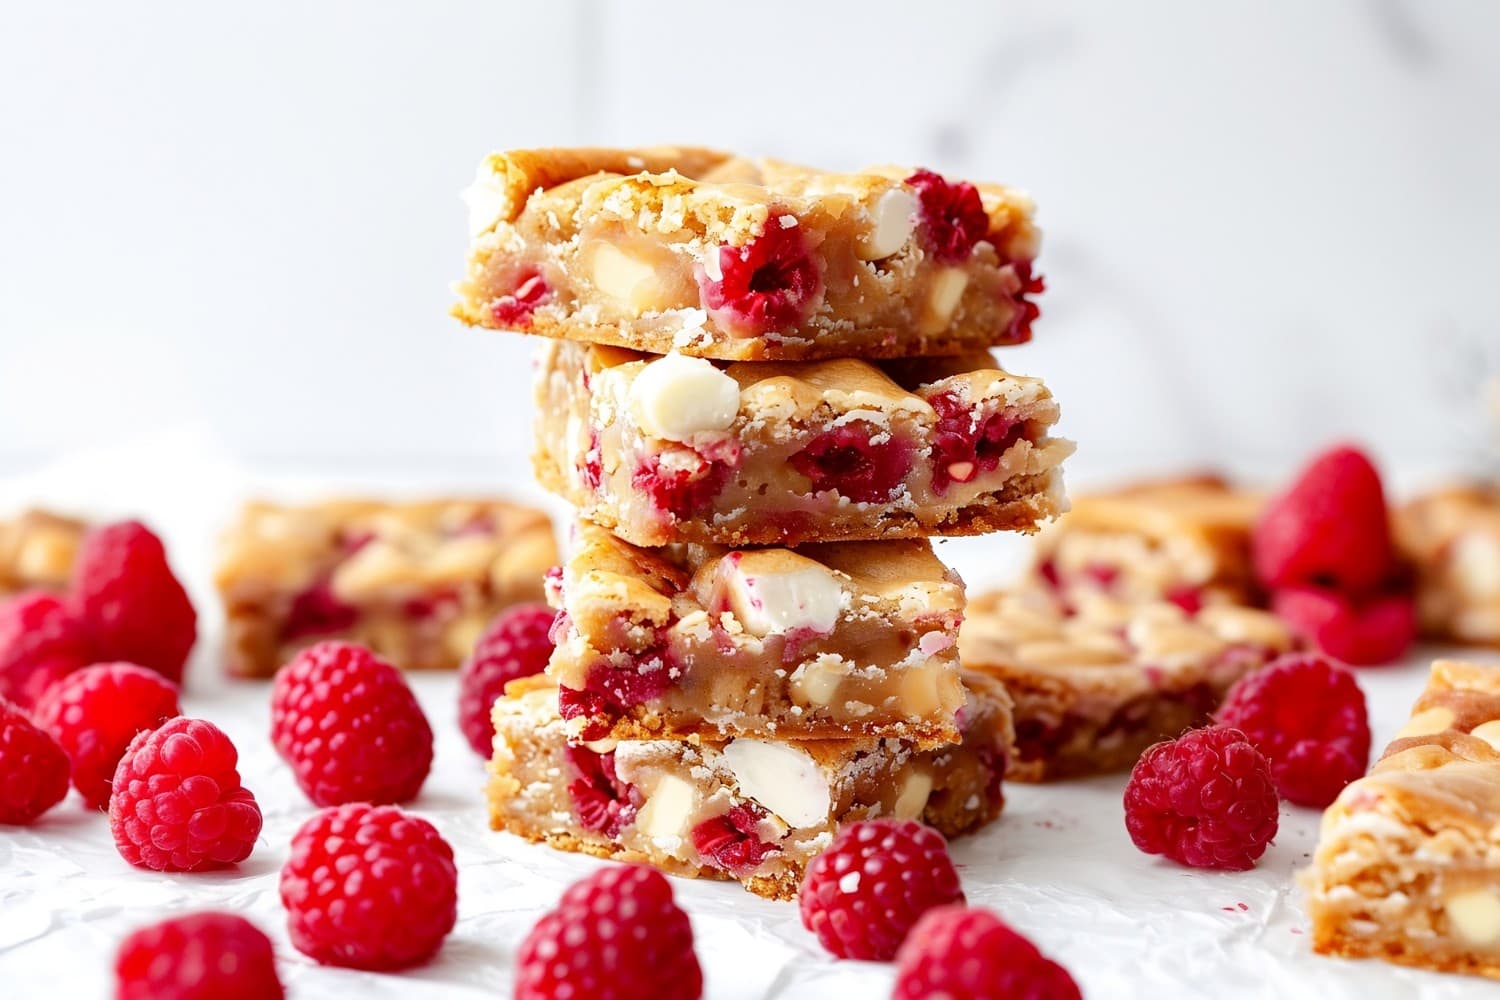 Classic raspberry and white chocolate blondies, with a soft, chewy texture and bursts of flavor.